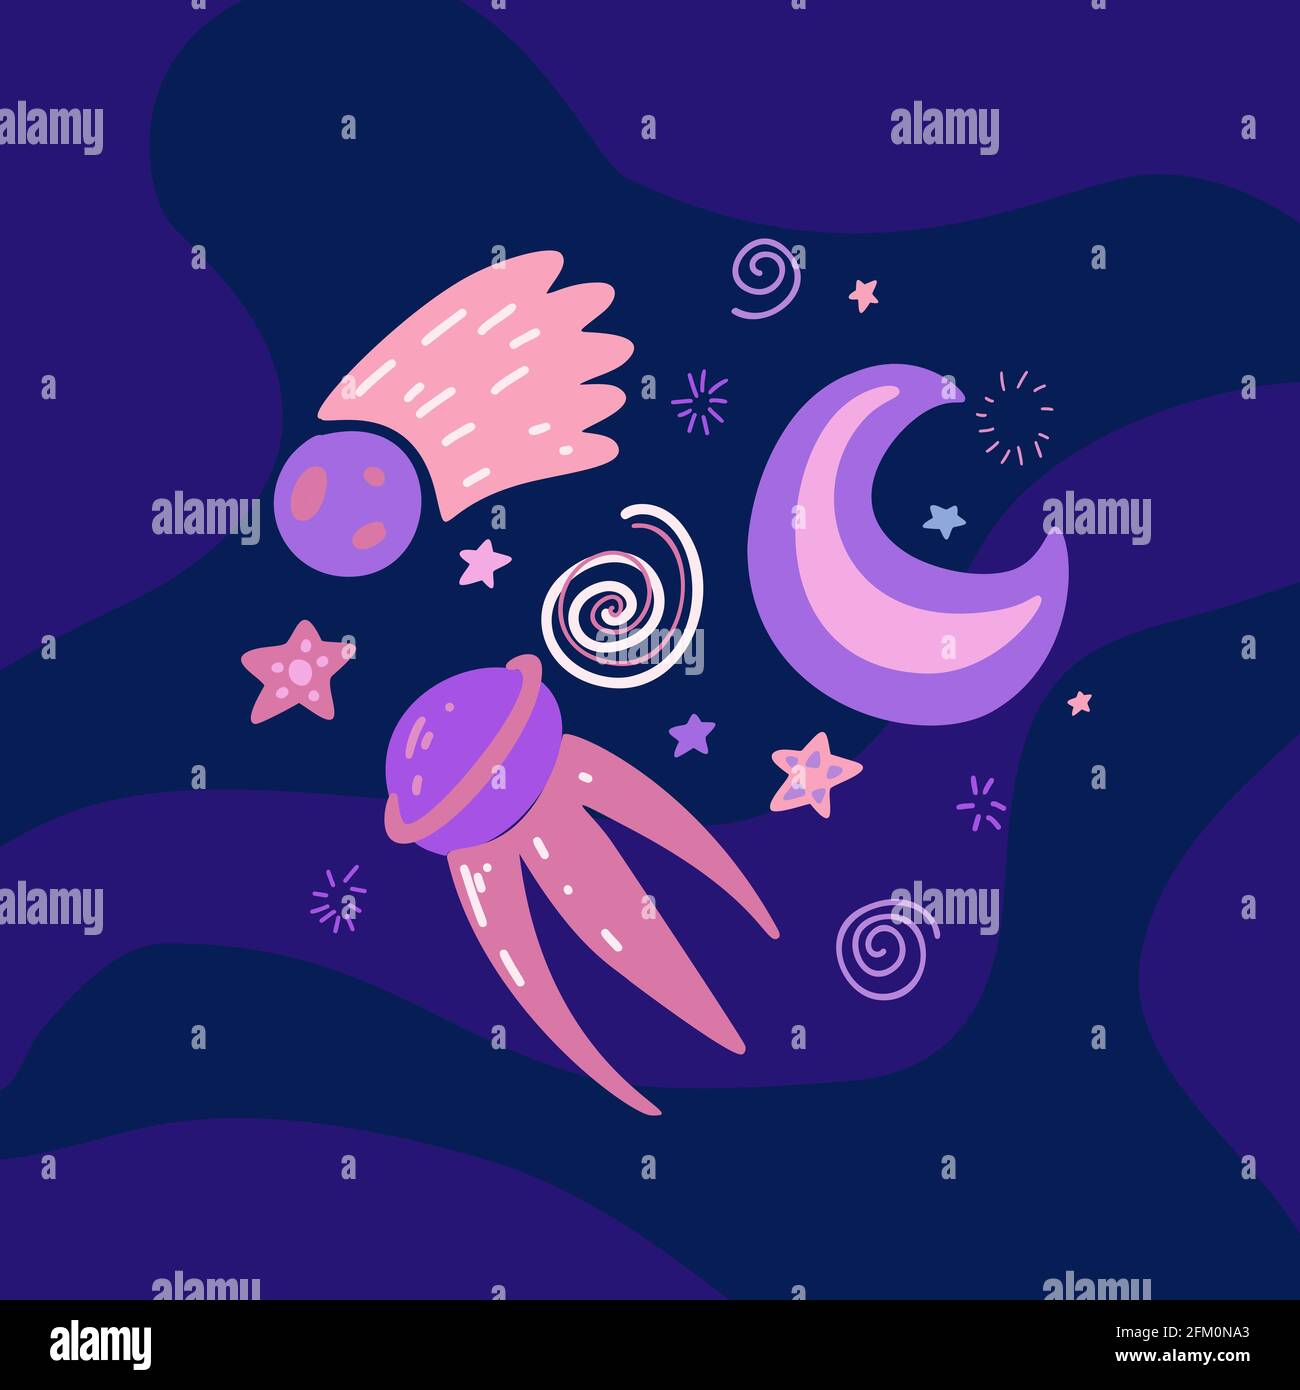 Childrens illustration of a space satellite, crescent moon, Saturn and stars on dark violet background. Space adventure. Galaxy exploration. Vector ha Stock Vector